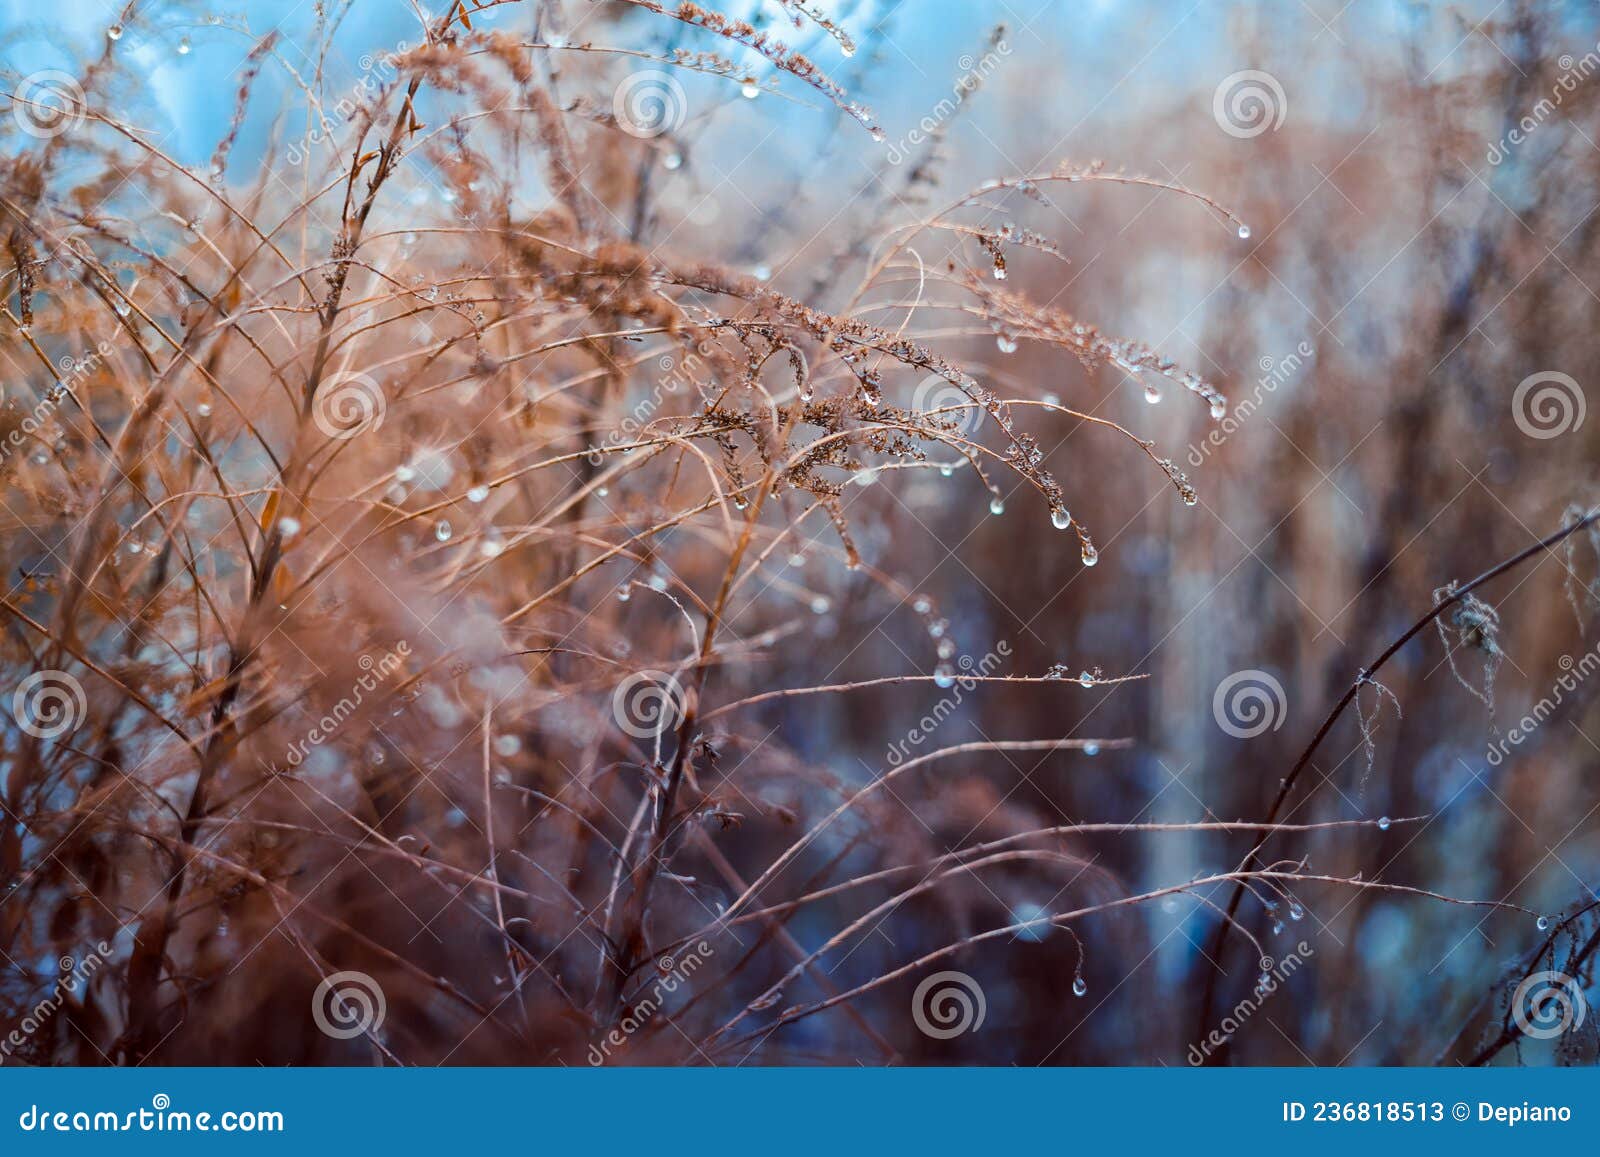 Vintage Dry Flowers Closeup. Aesthetic Toned Nature Landscape Background  Stock Image - Image of field, blue: 236818513